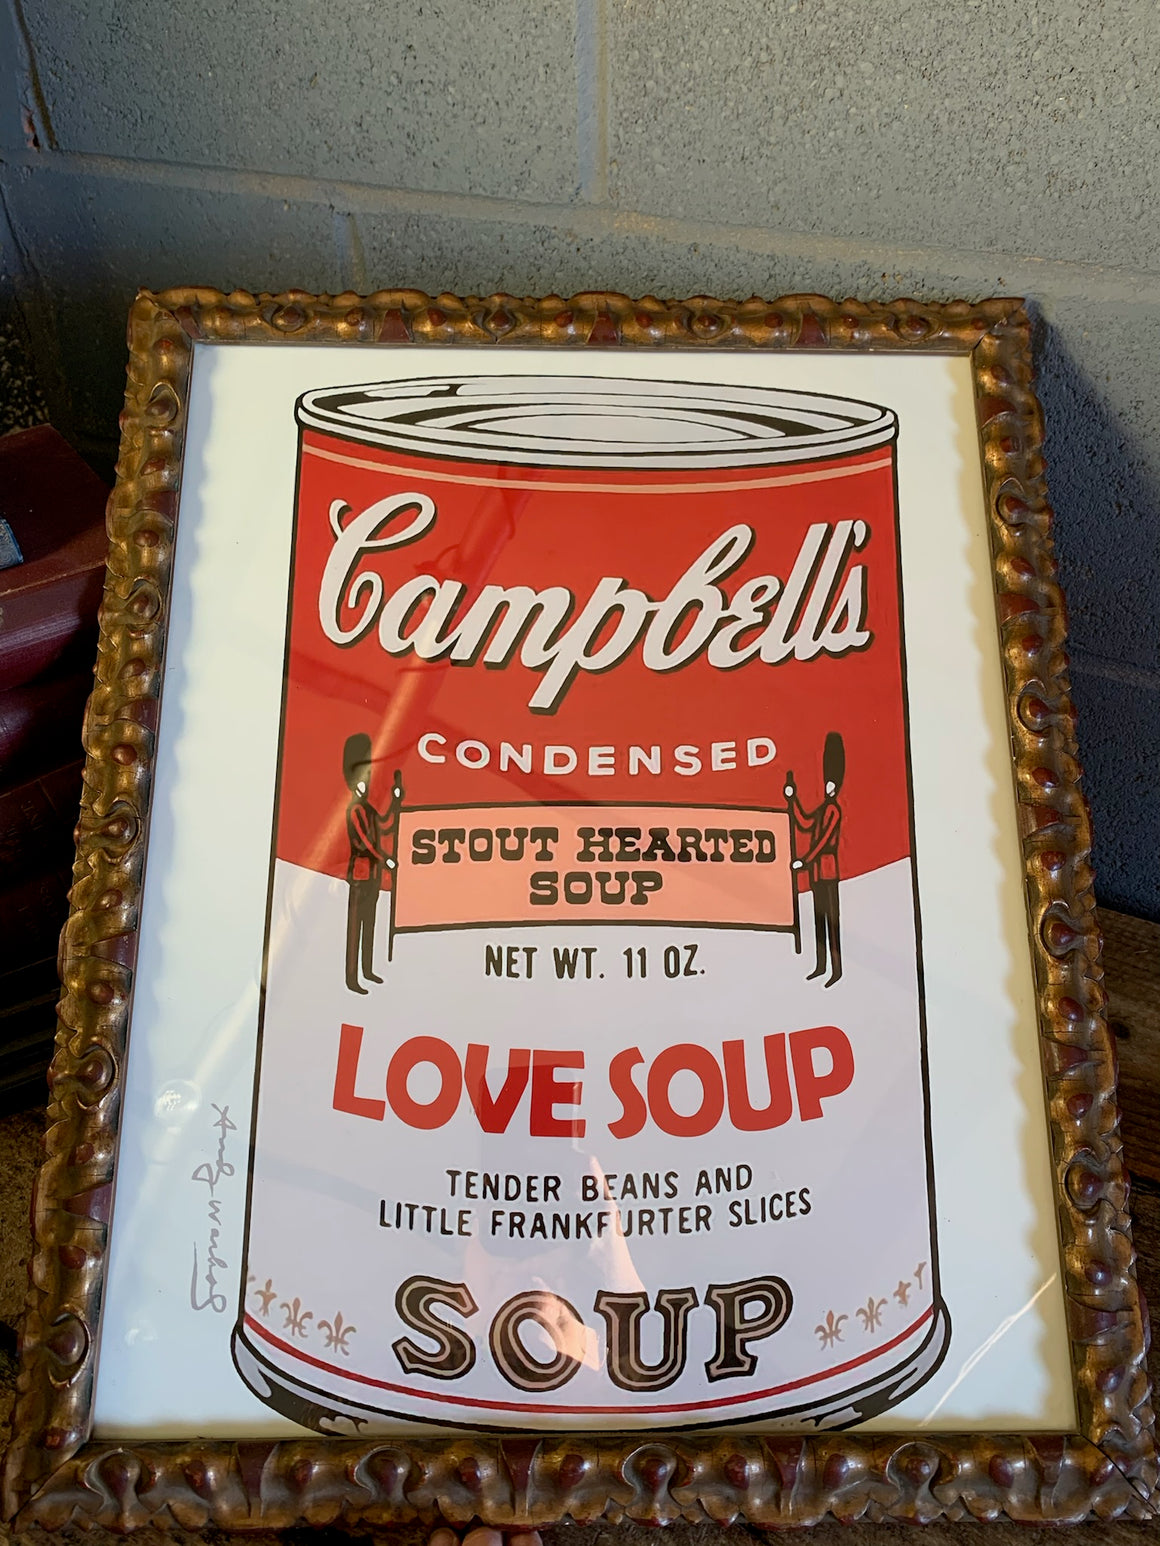 A framed and glazed Warhol print - "Campbell's soup can" - in an antique frame